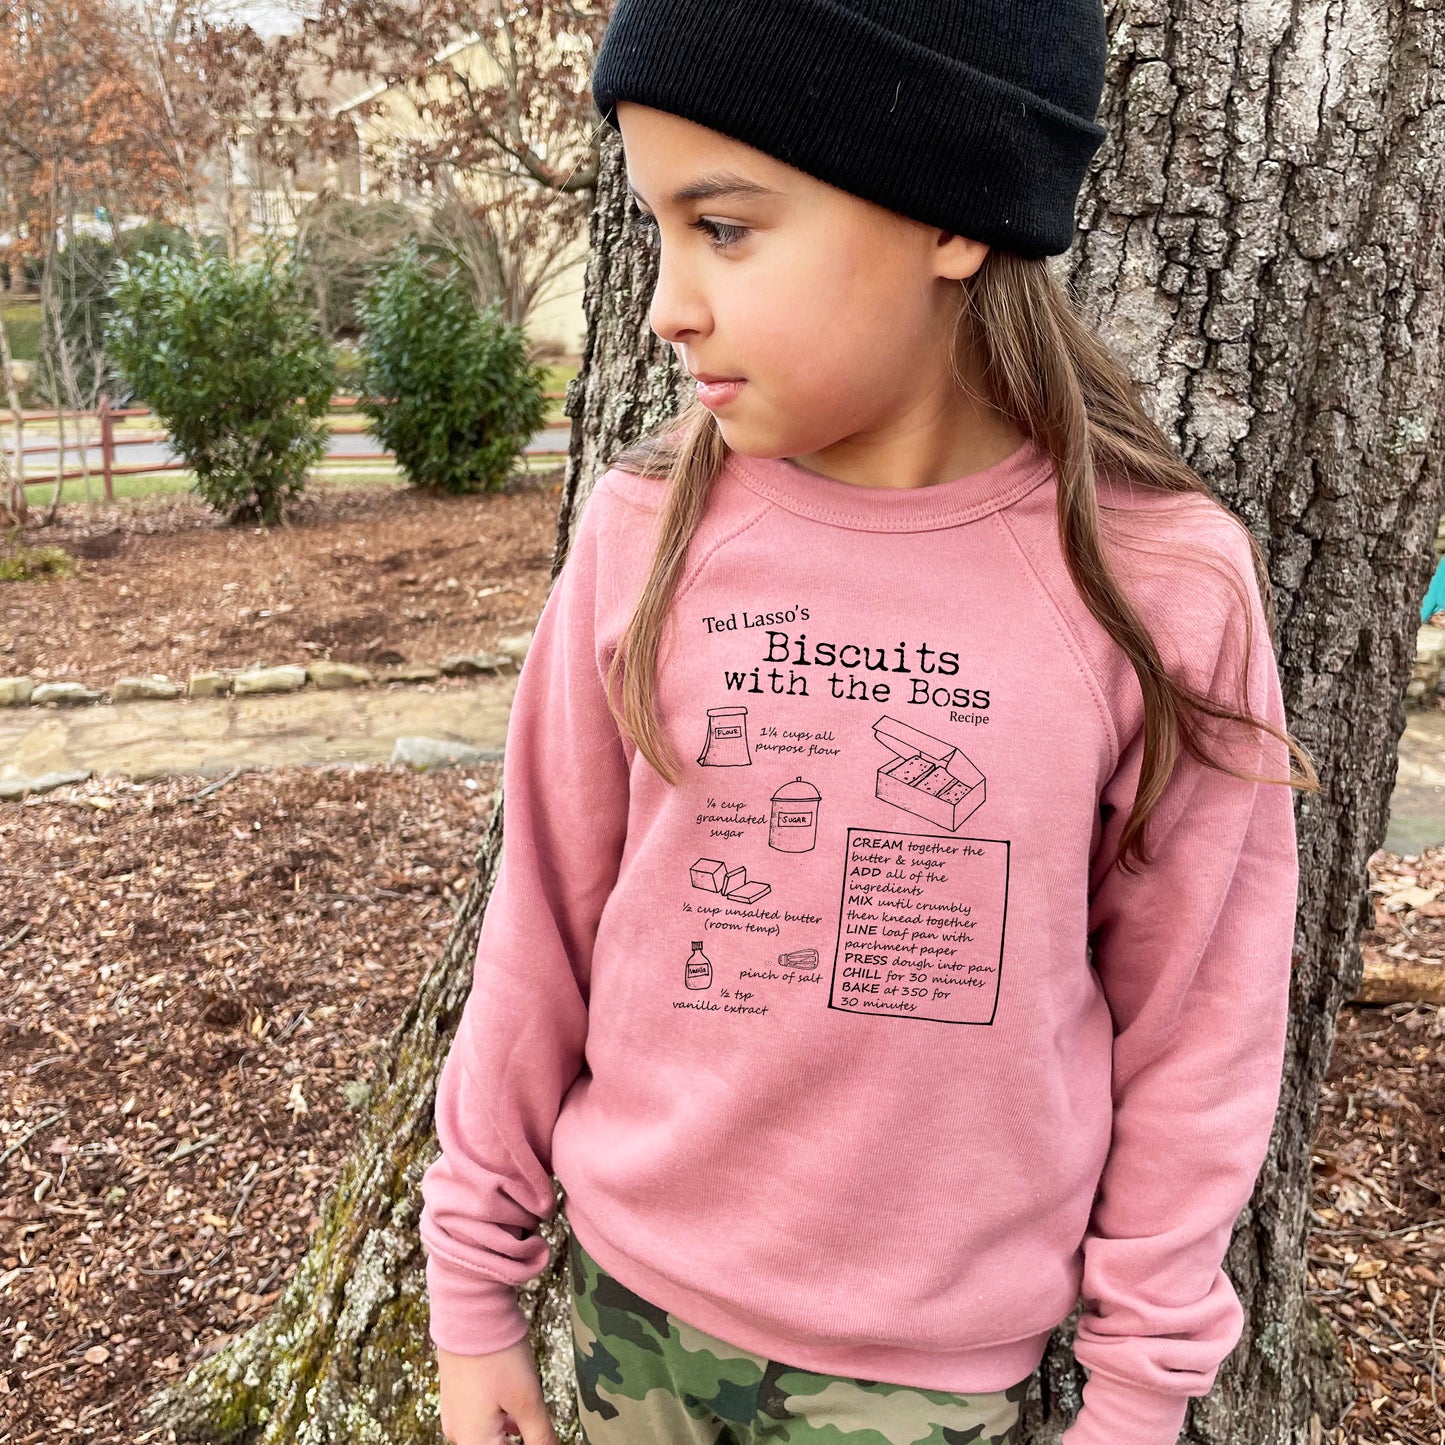 Biscuits With The Boss (Ted Lasso) - Kid's Sweatshirt - Heather Gray or Mauve